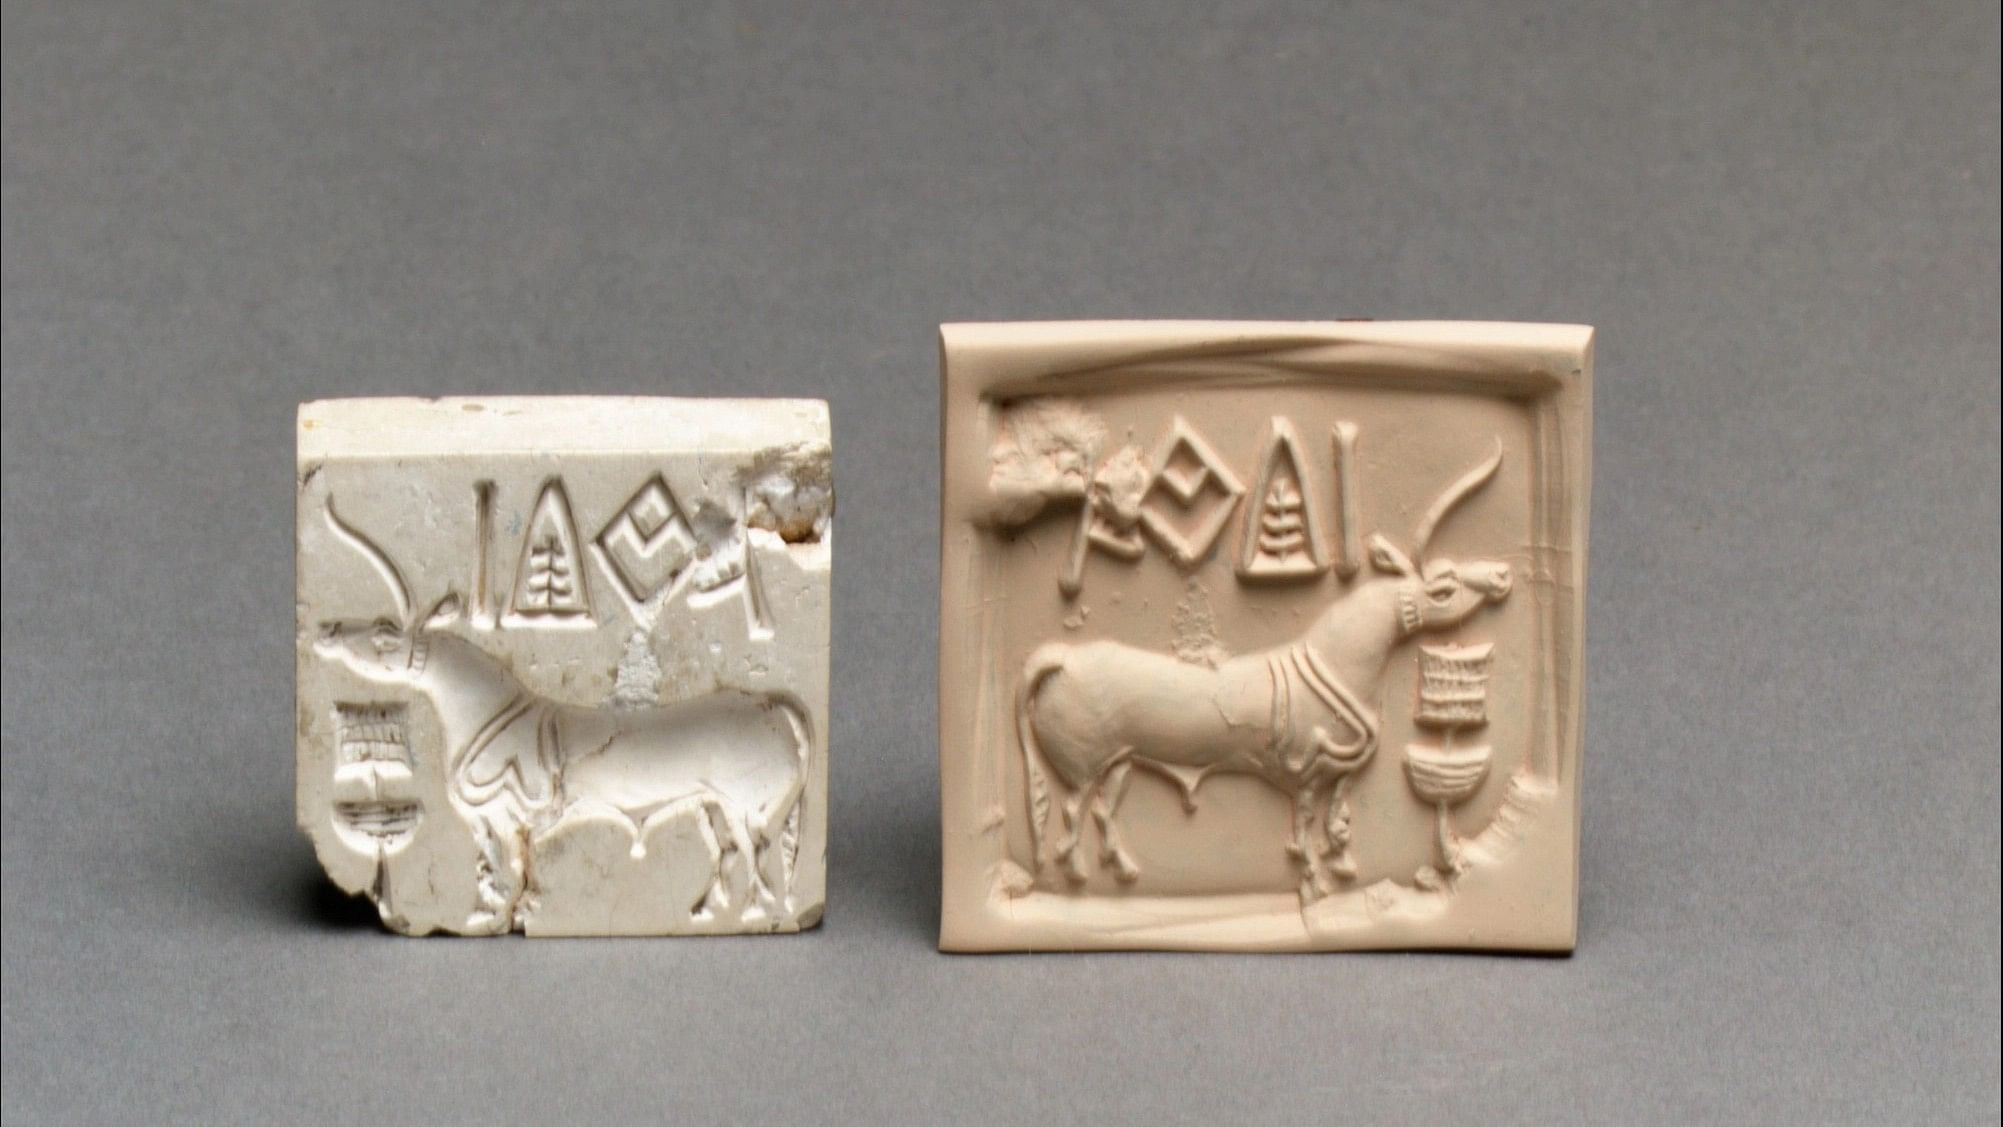 Unicorn and possible incense burner, Indus Valley, Mature Harappan period, 2600-1900 BCE, steatite (Pic courtesy: Met)